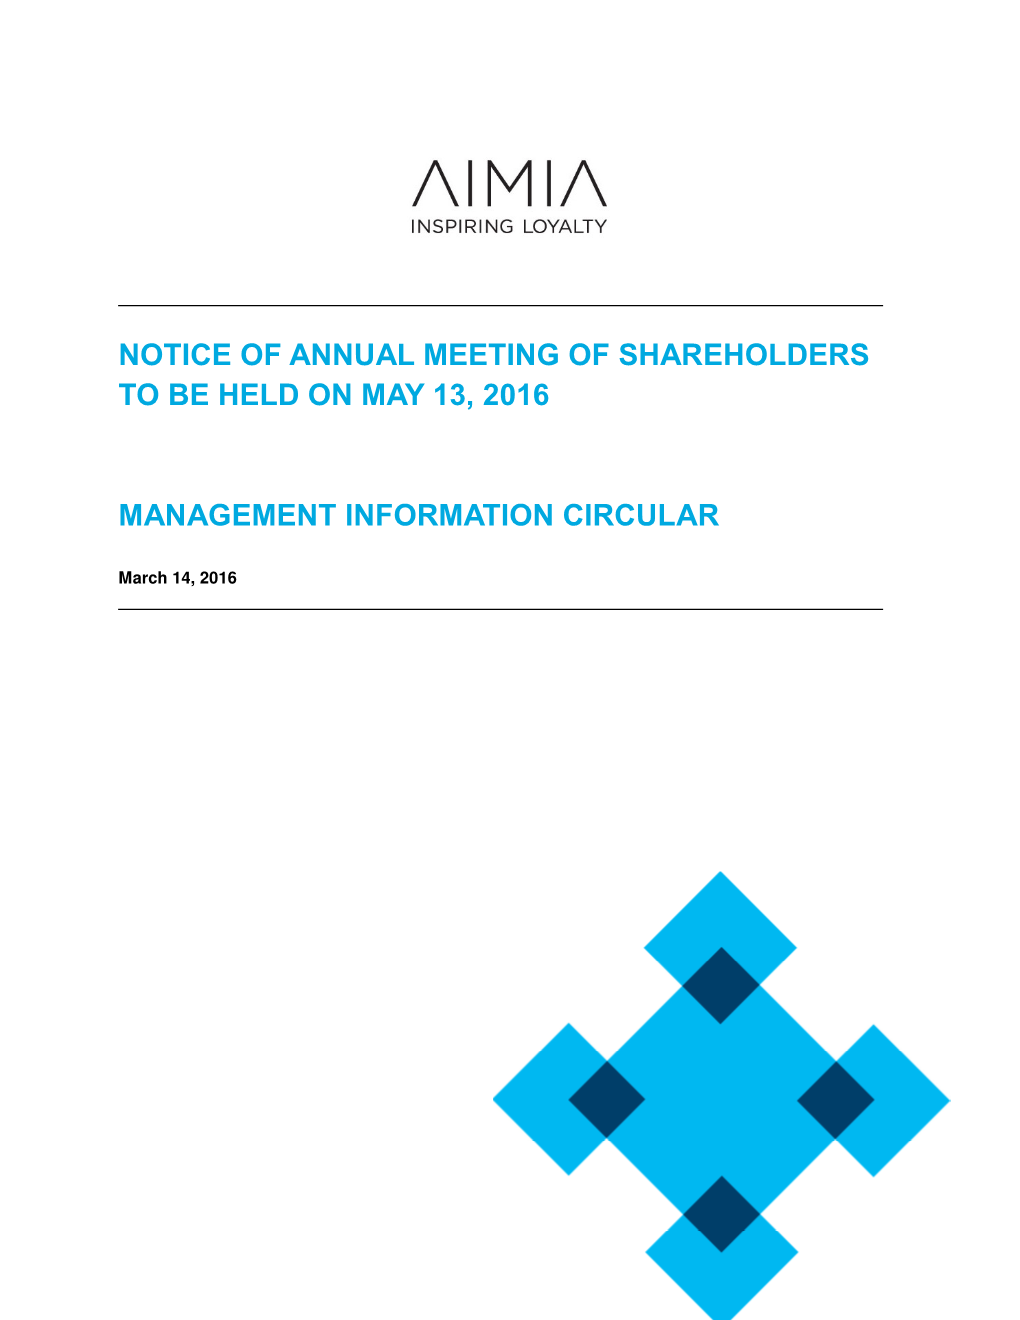 Notice of Annual Meeting of Shareholders to Be Held on May 13, 2016